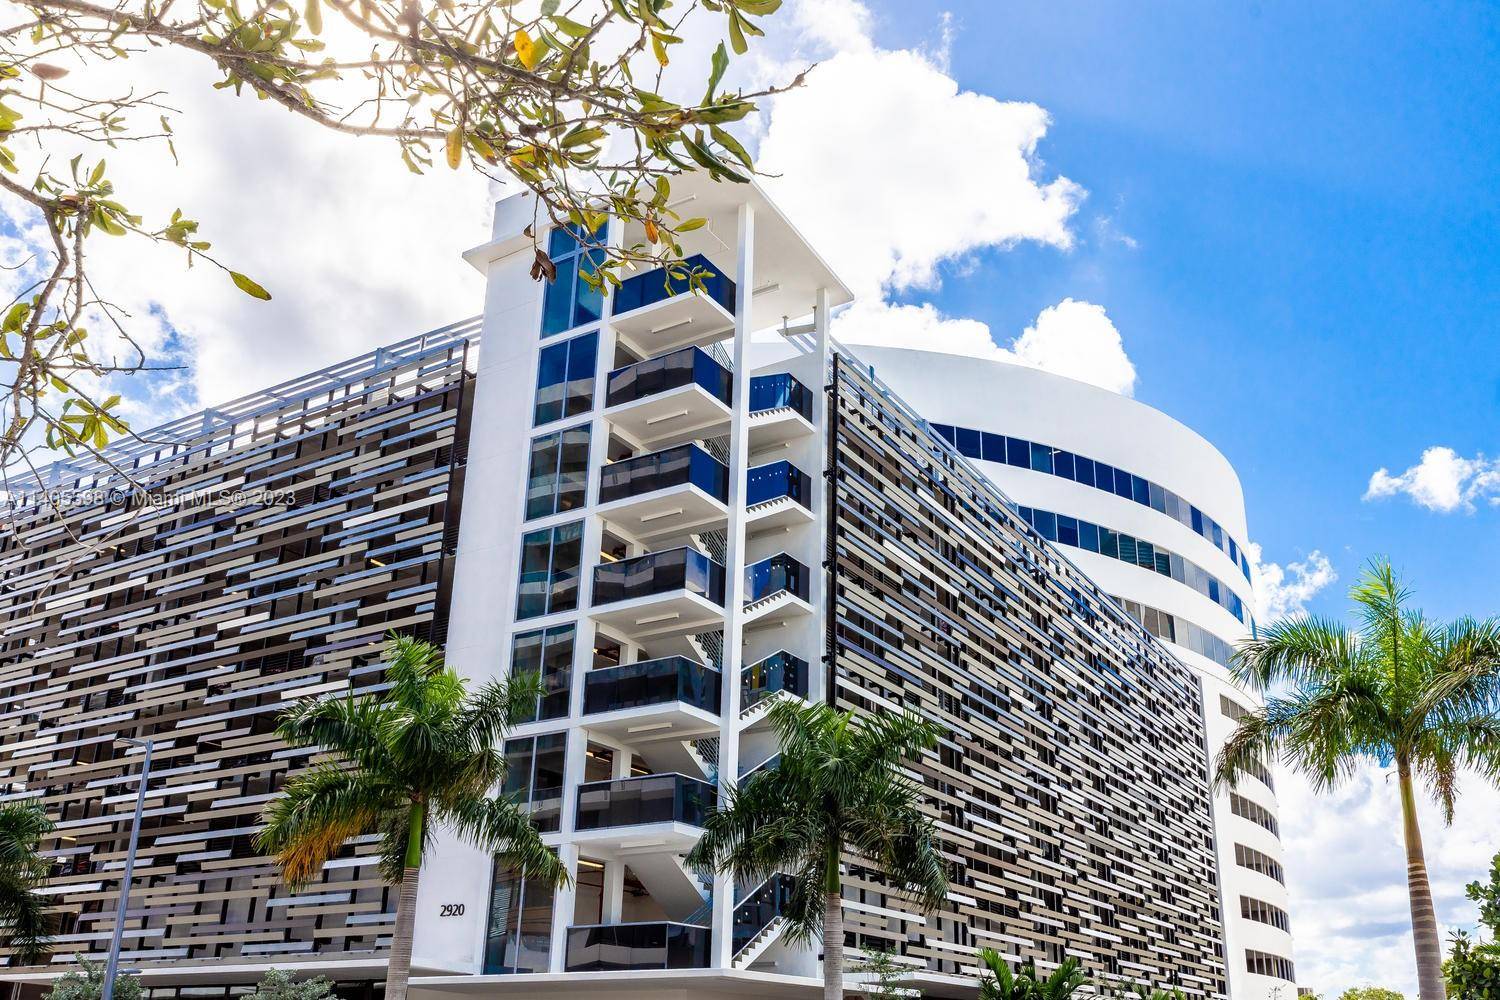 Aventura ParkSquare offers spacious offices in a brand New Class A Medical Office Building located in the heart of Aventura.